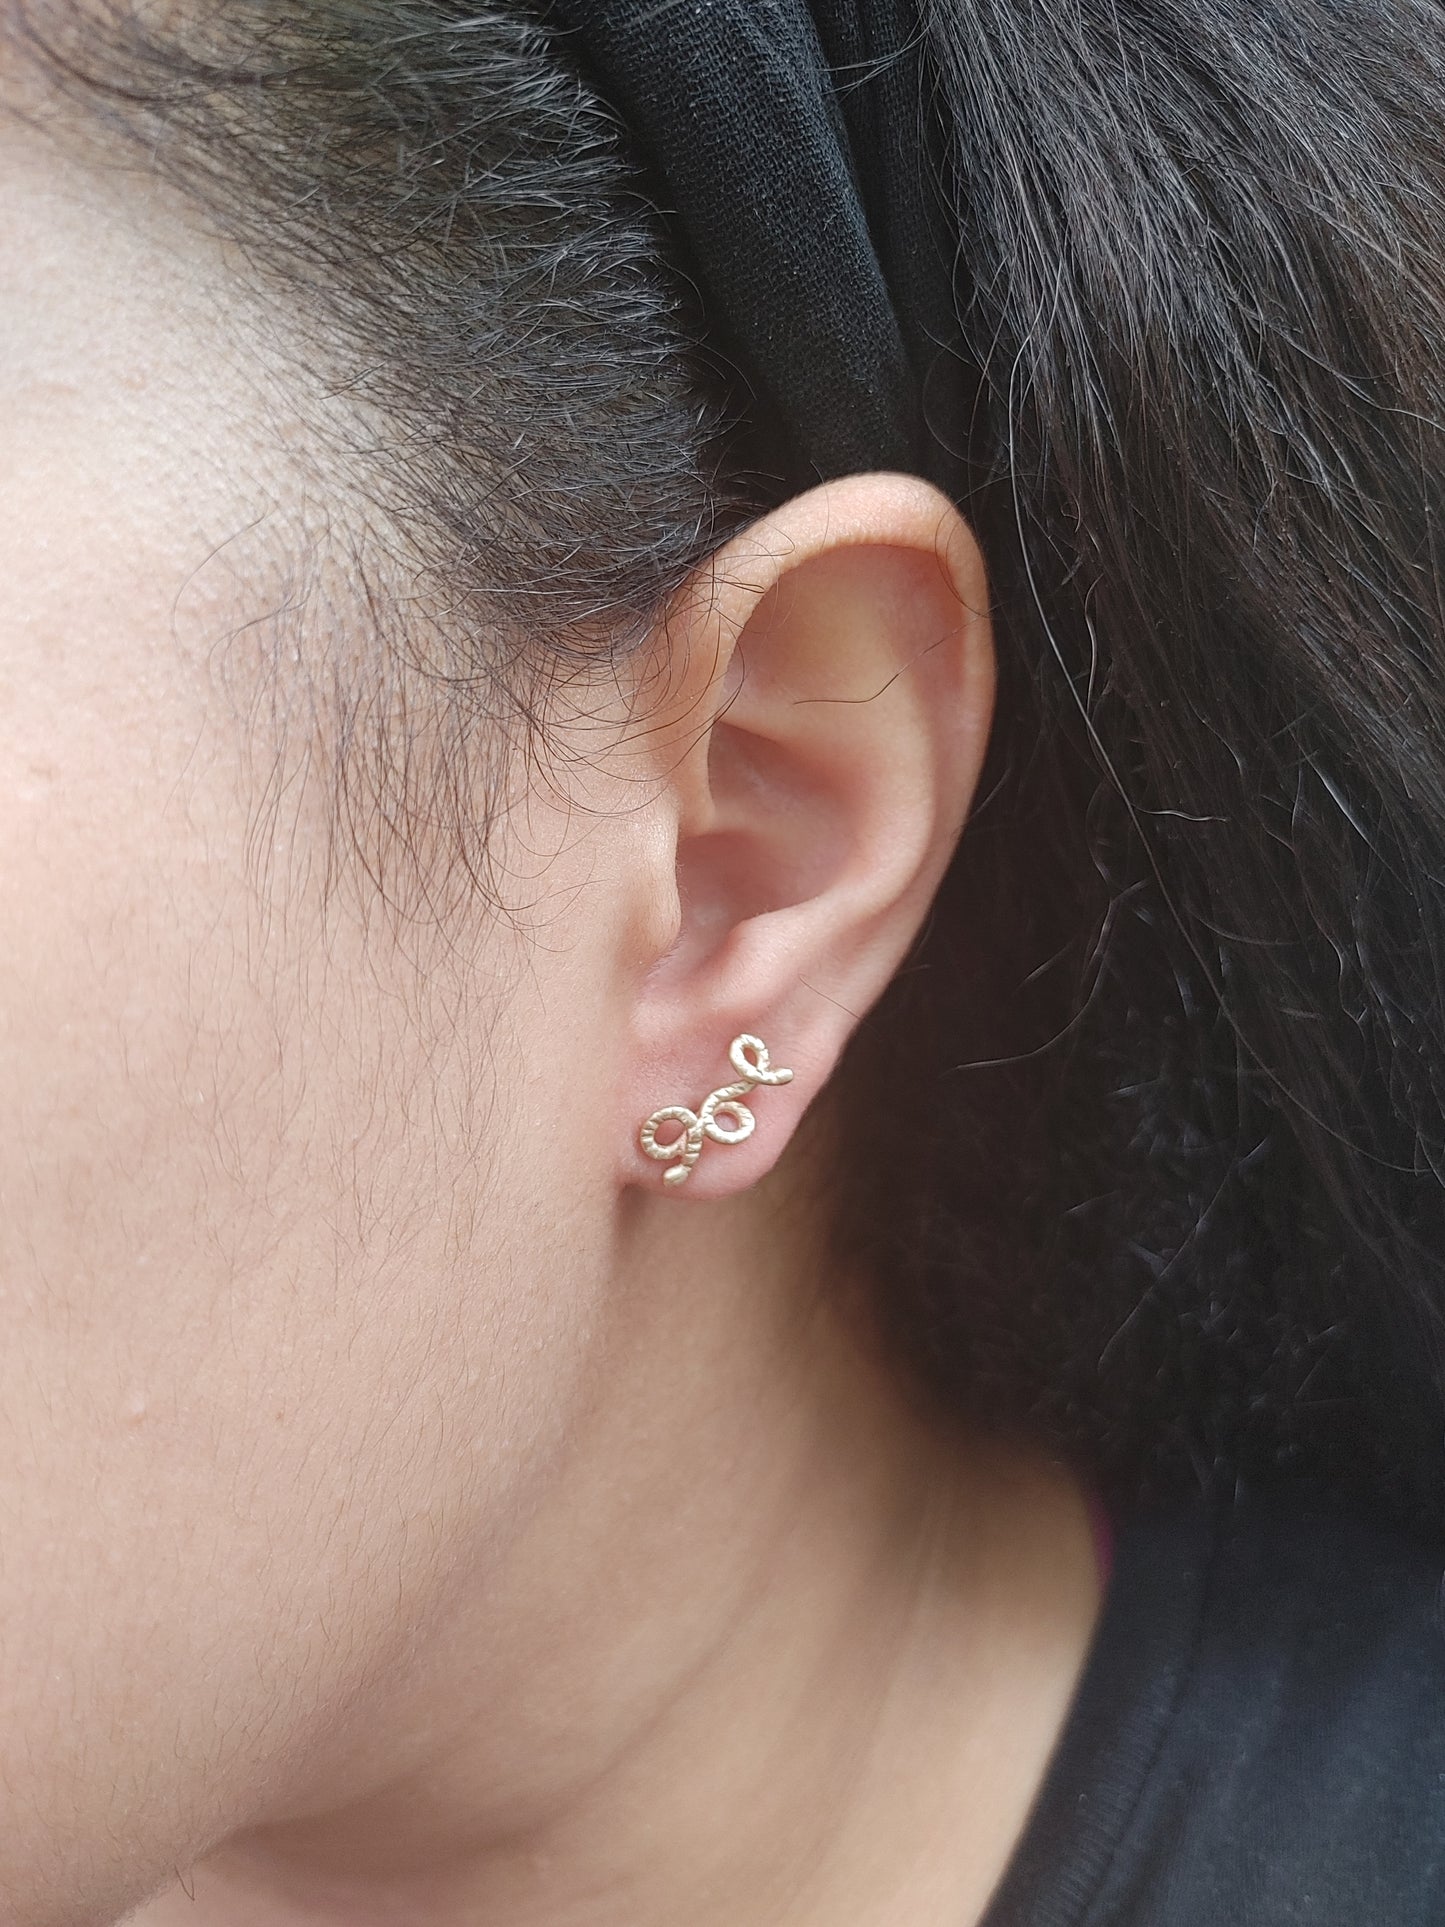 The Child Studs in Gold